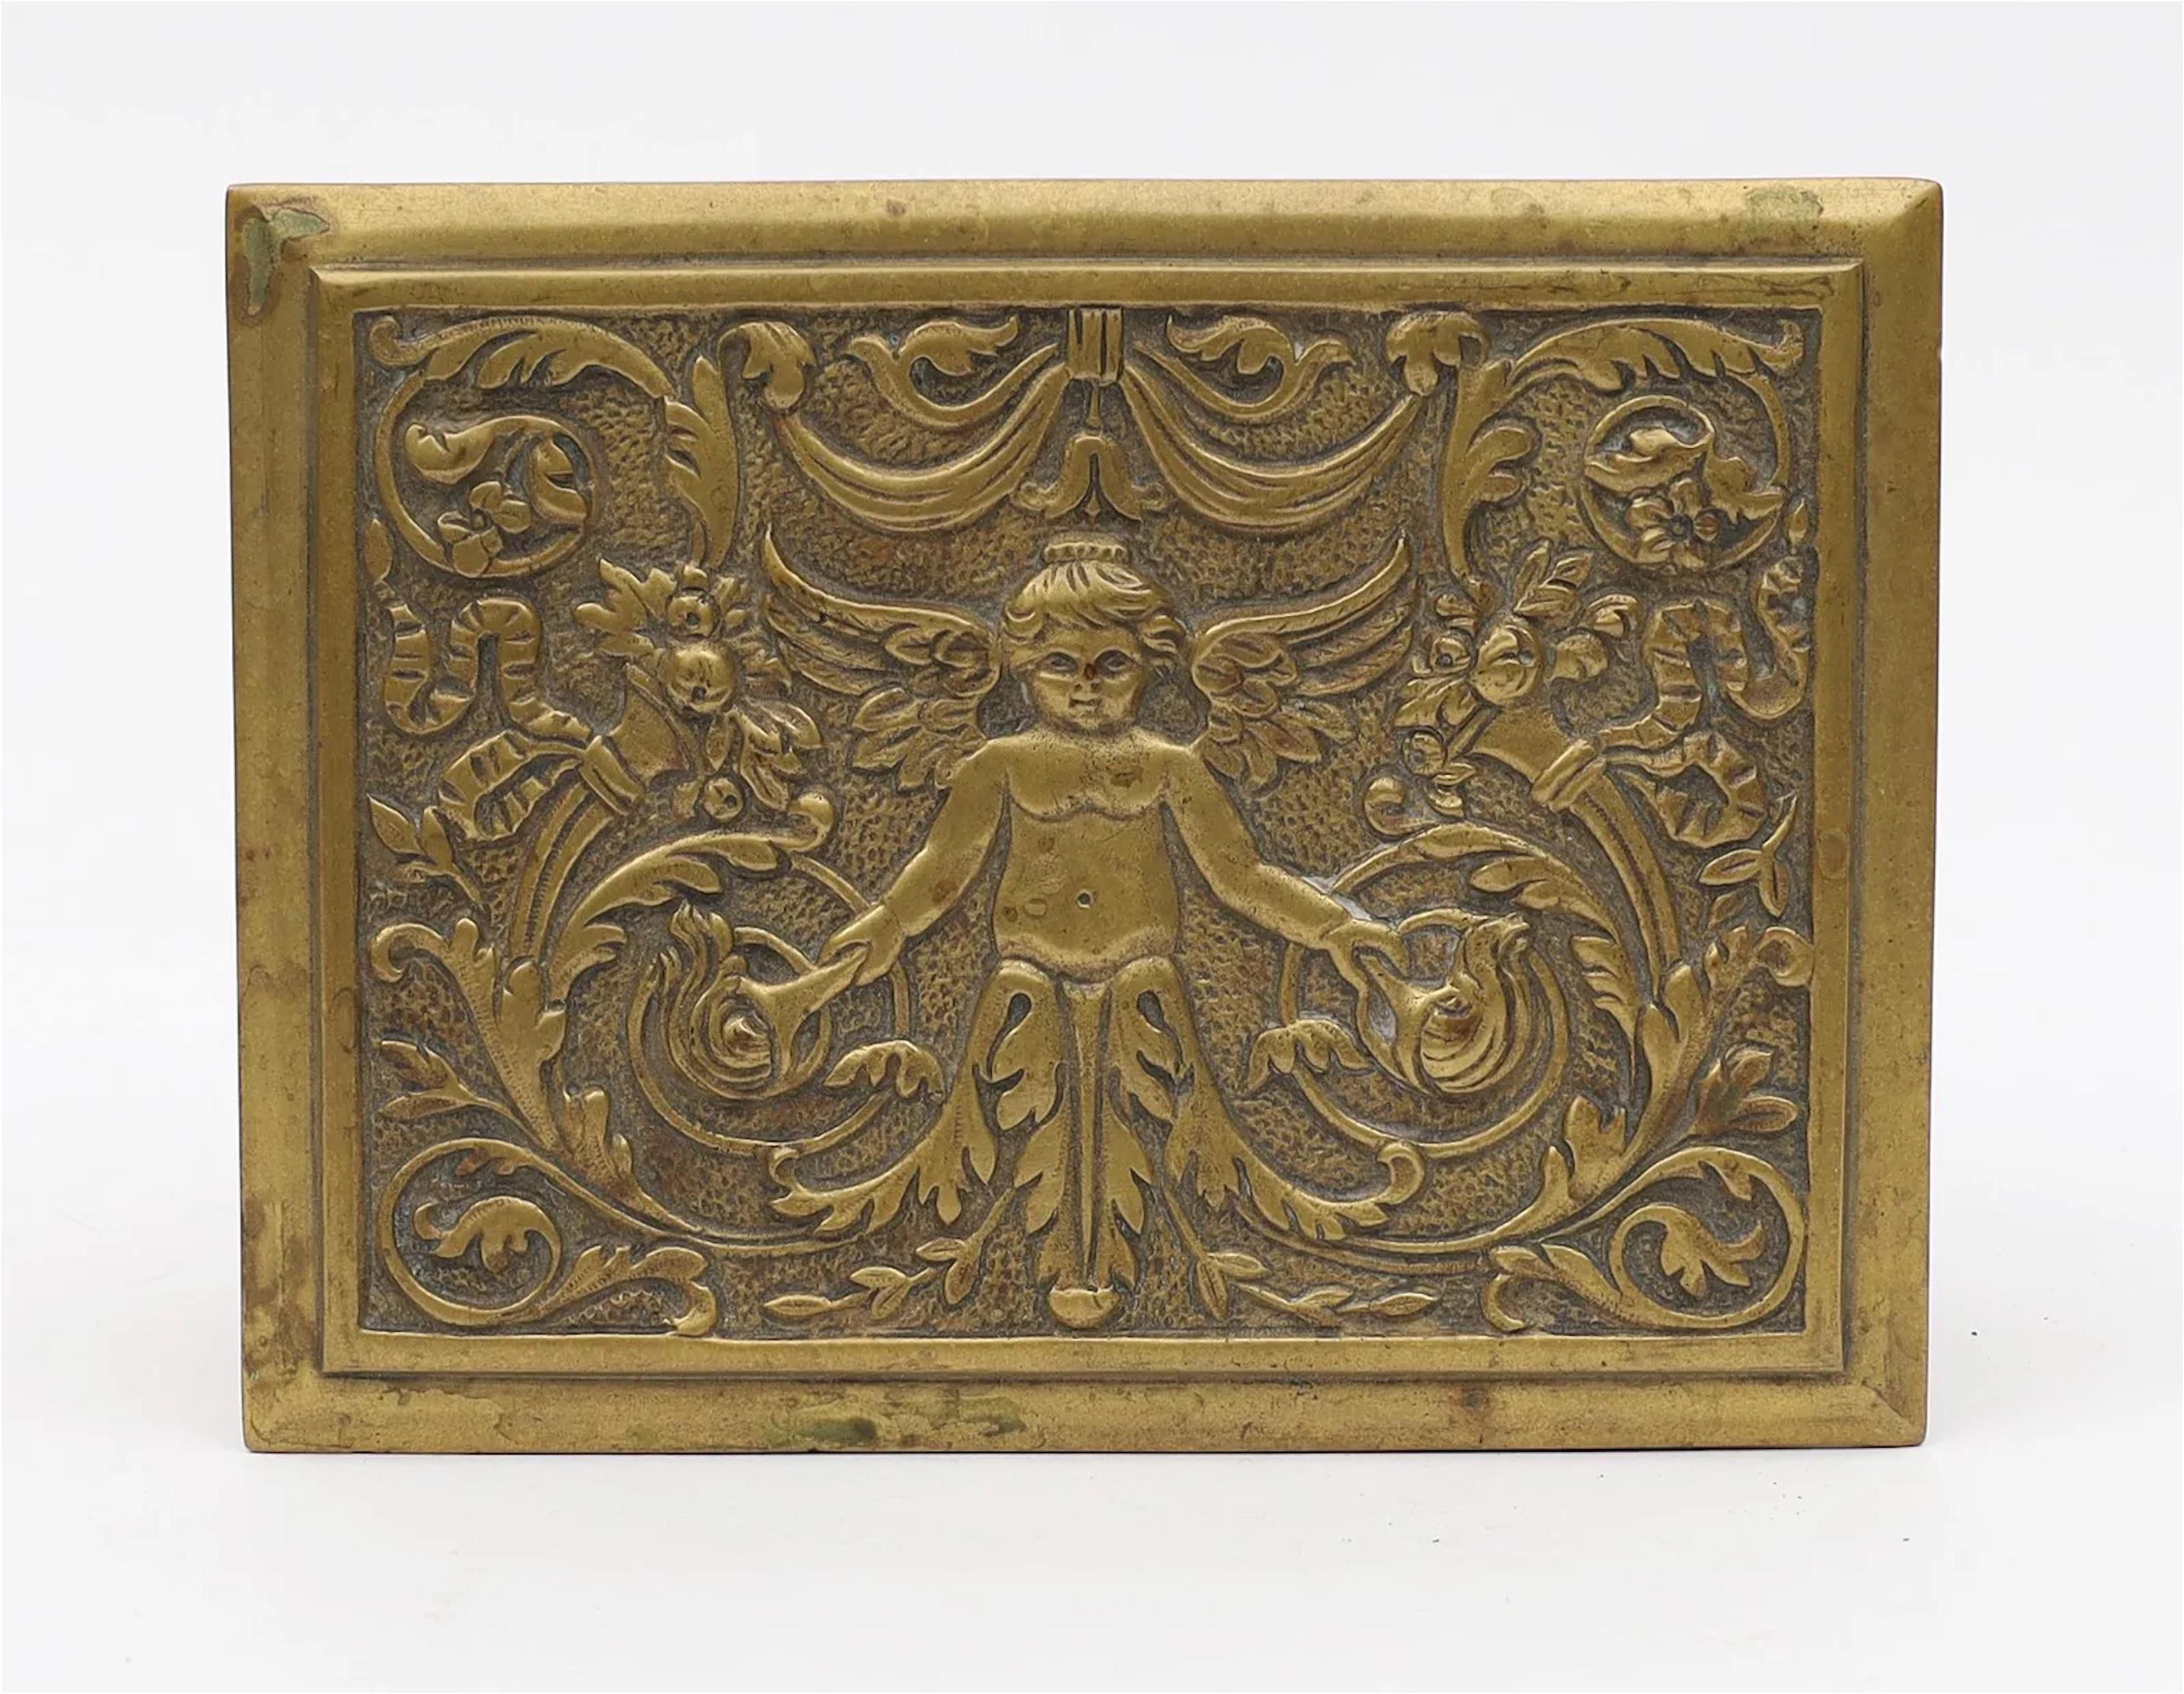 Highly Decorated Renaissance Style Solid Brass Jewelry Trinket Box In Good Condition For Sale In Montreal, QC